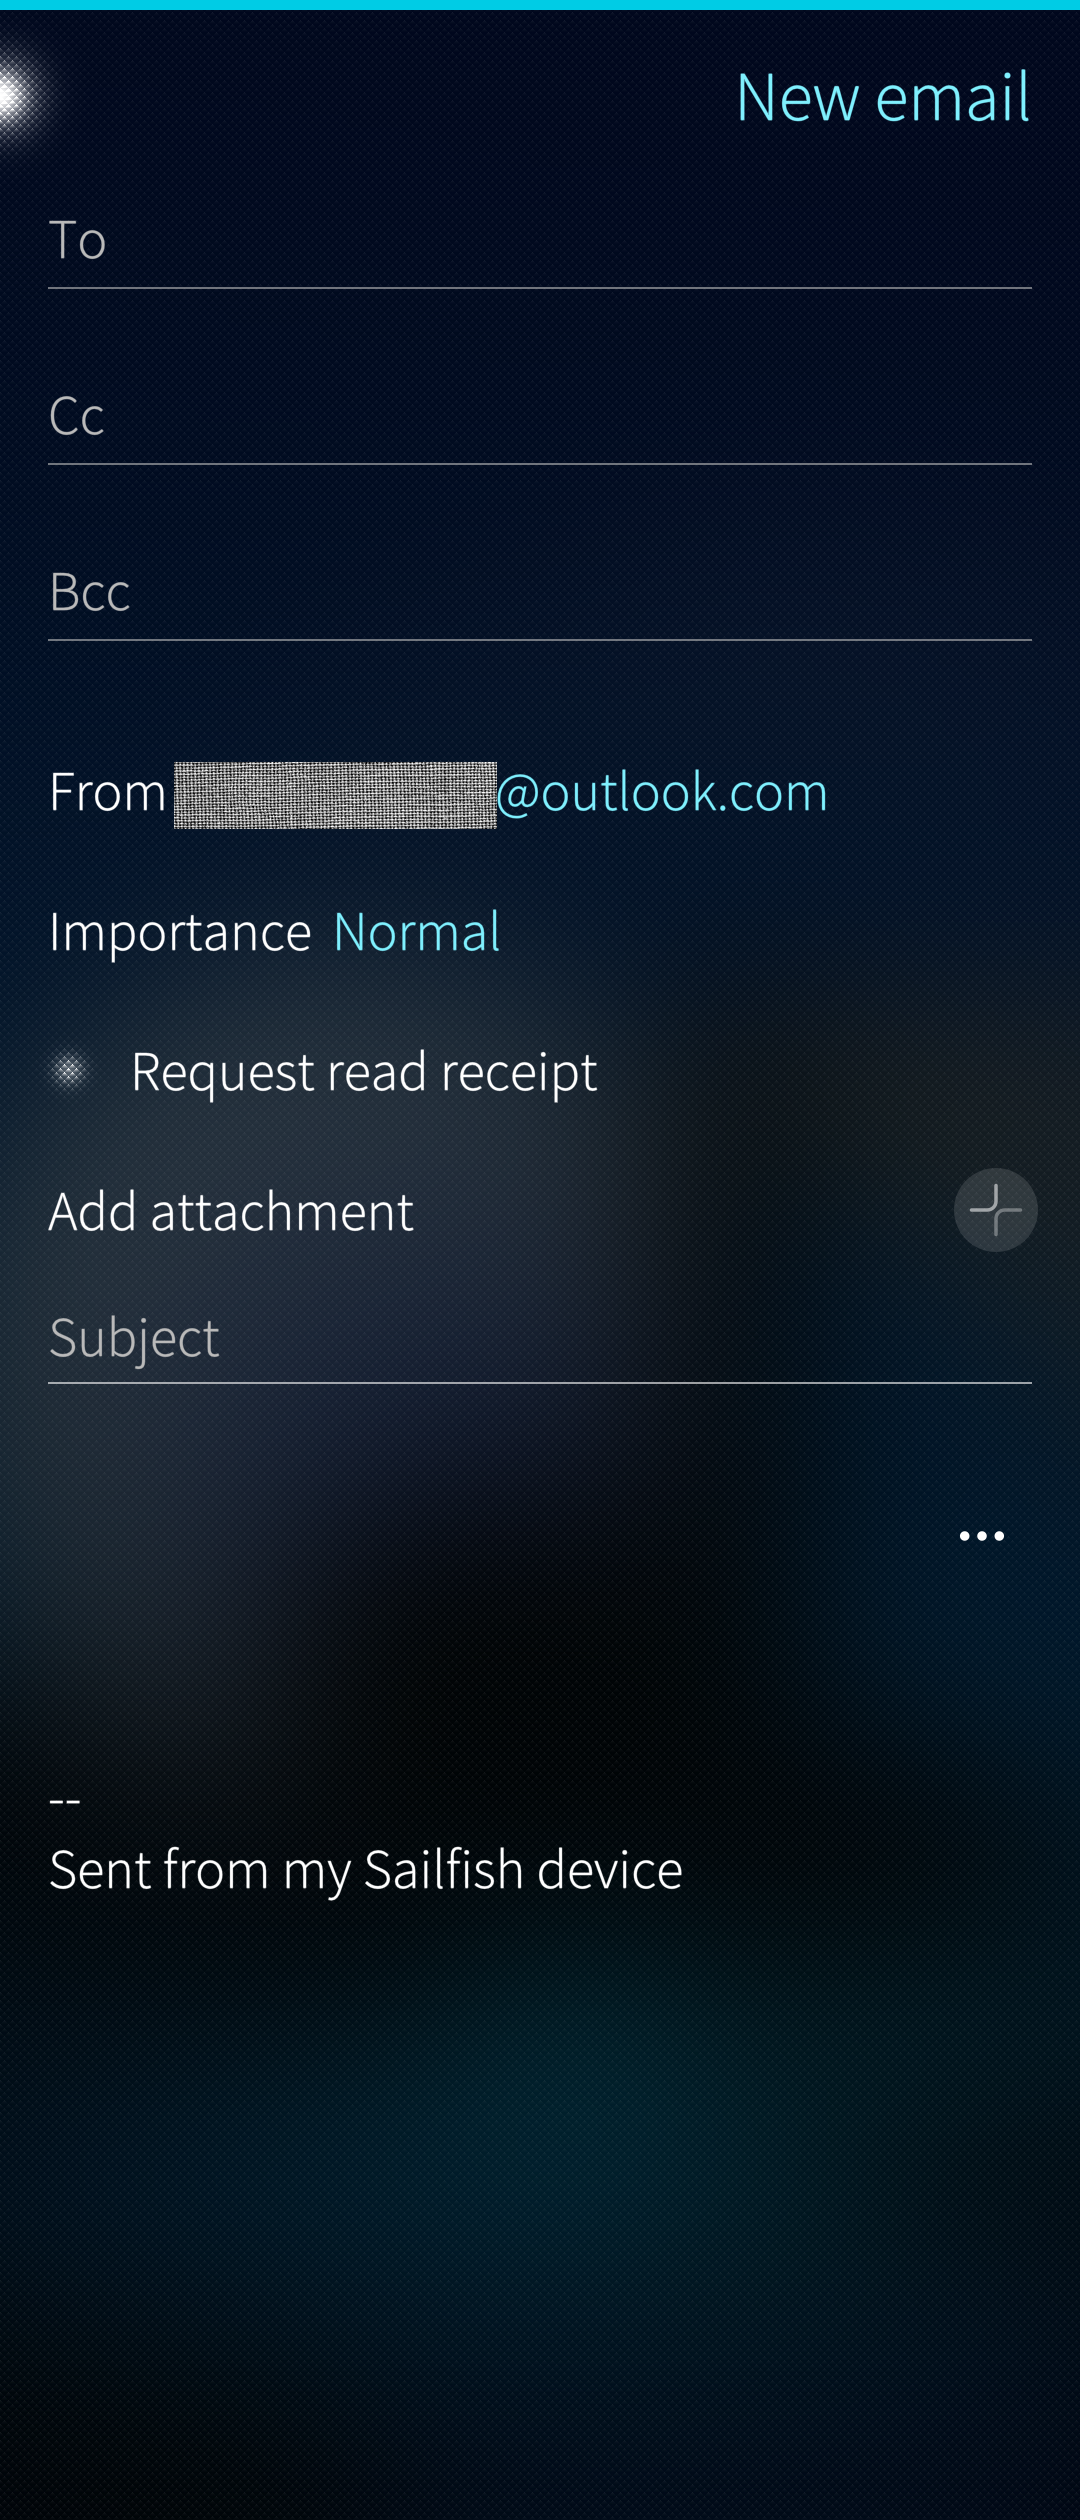 New email - additional settings